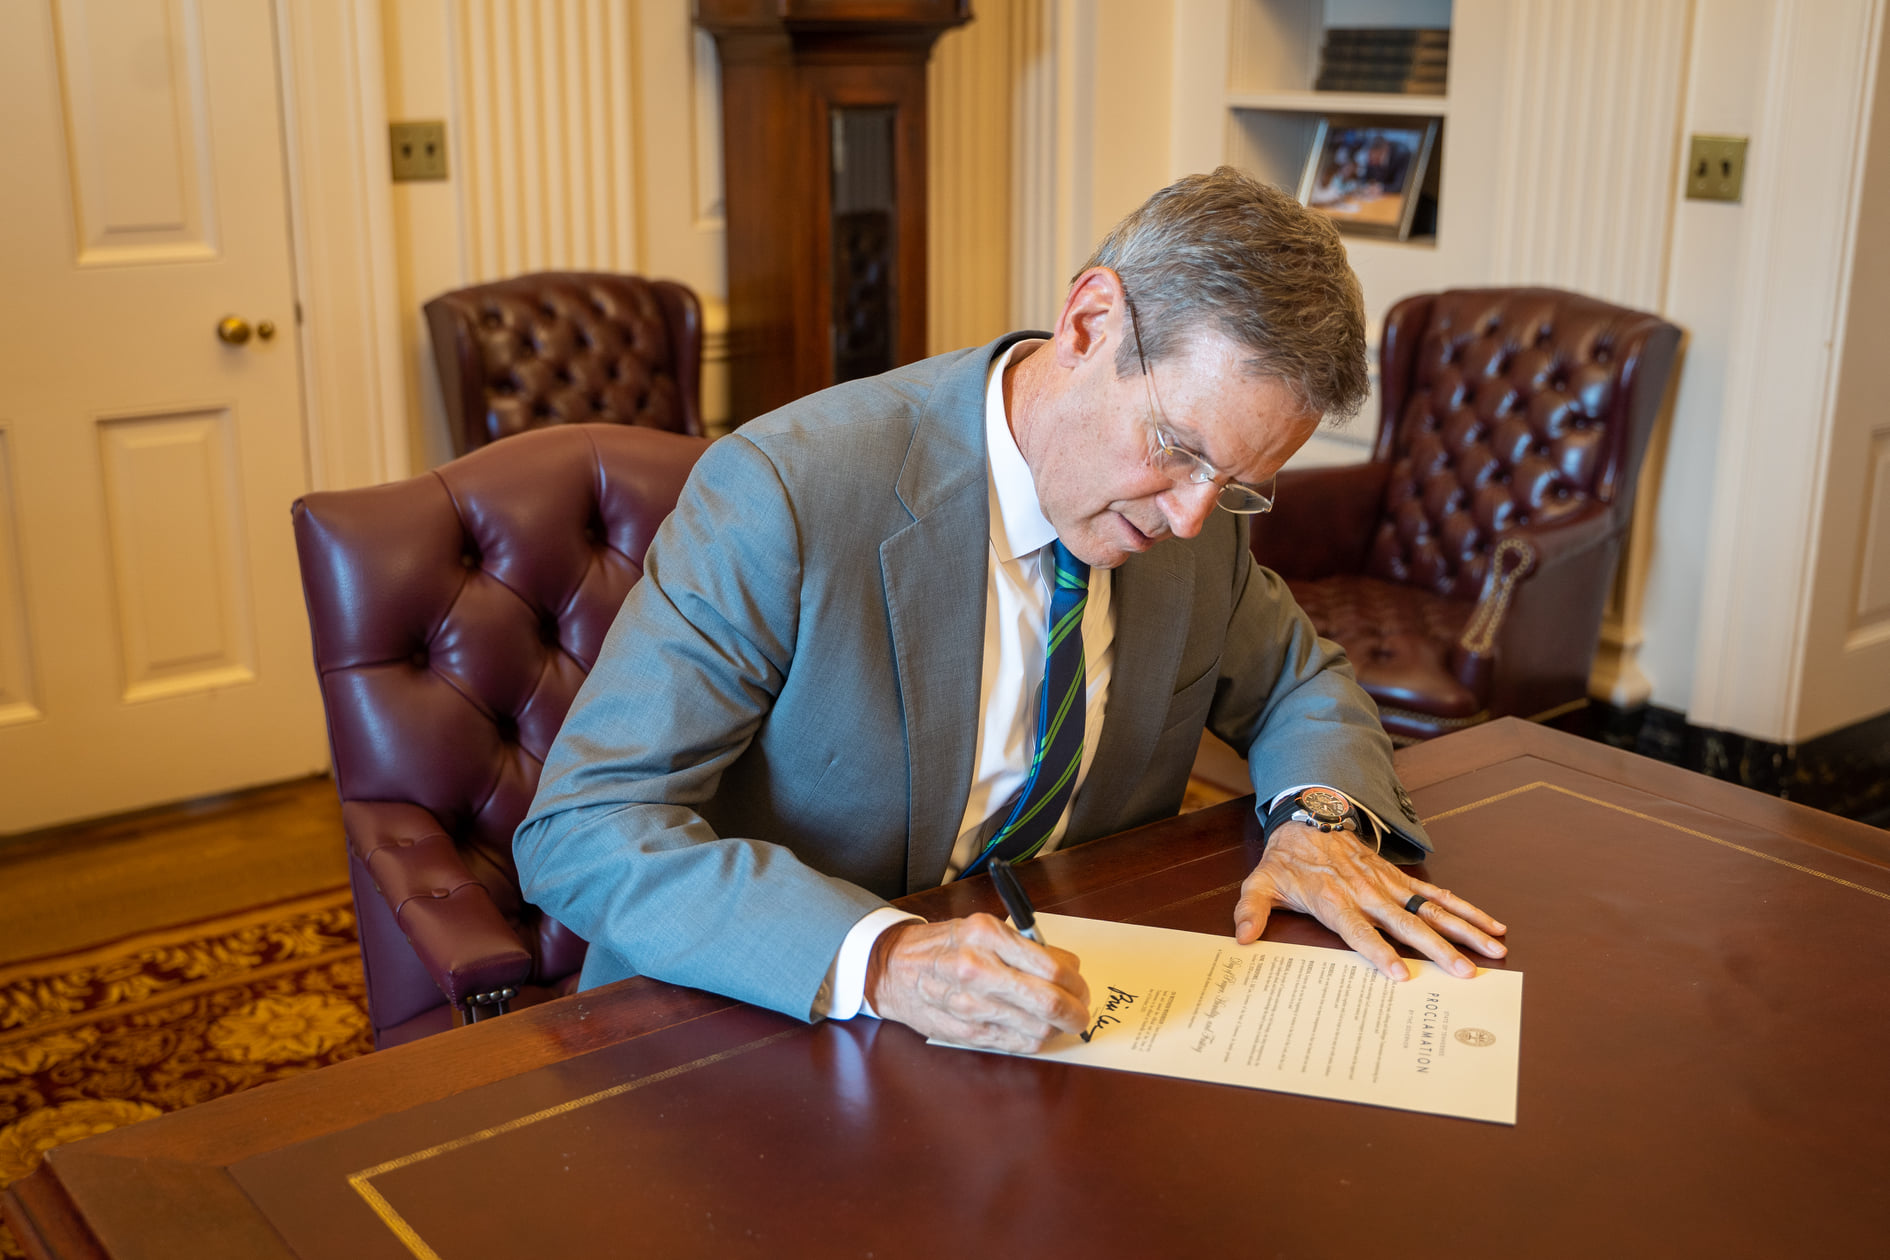 Tennessee Day of Prayer and Fasting - Gov. Bill Lee declared, Thursday, October 15, 2020 to be a day of Prayer and Fasting. #Prayer #Fasting #GovBillLee #Tennessee